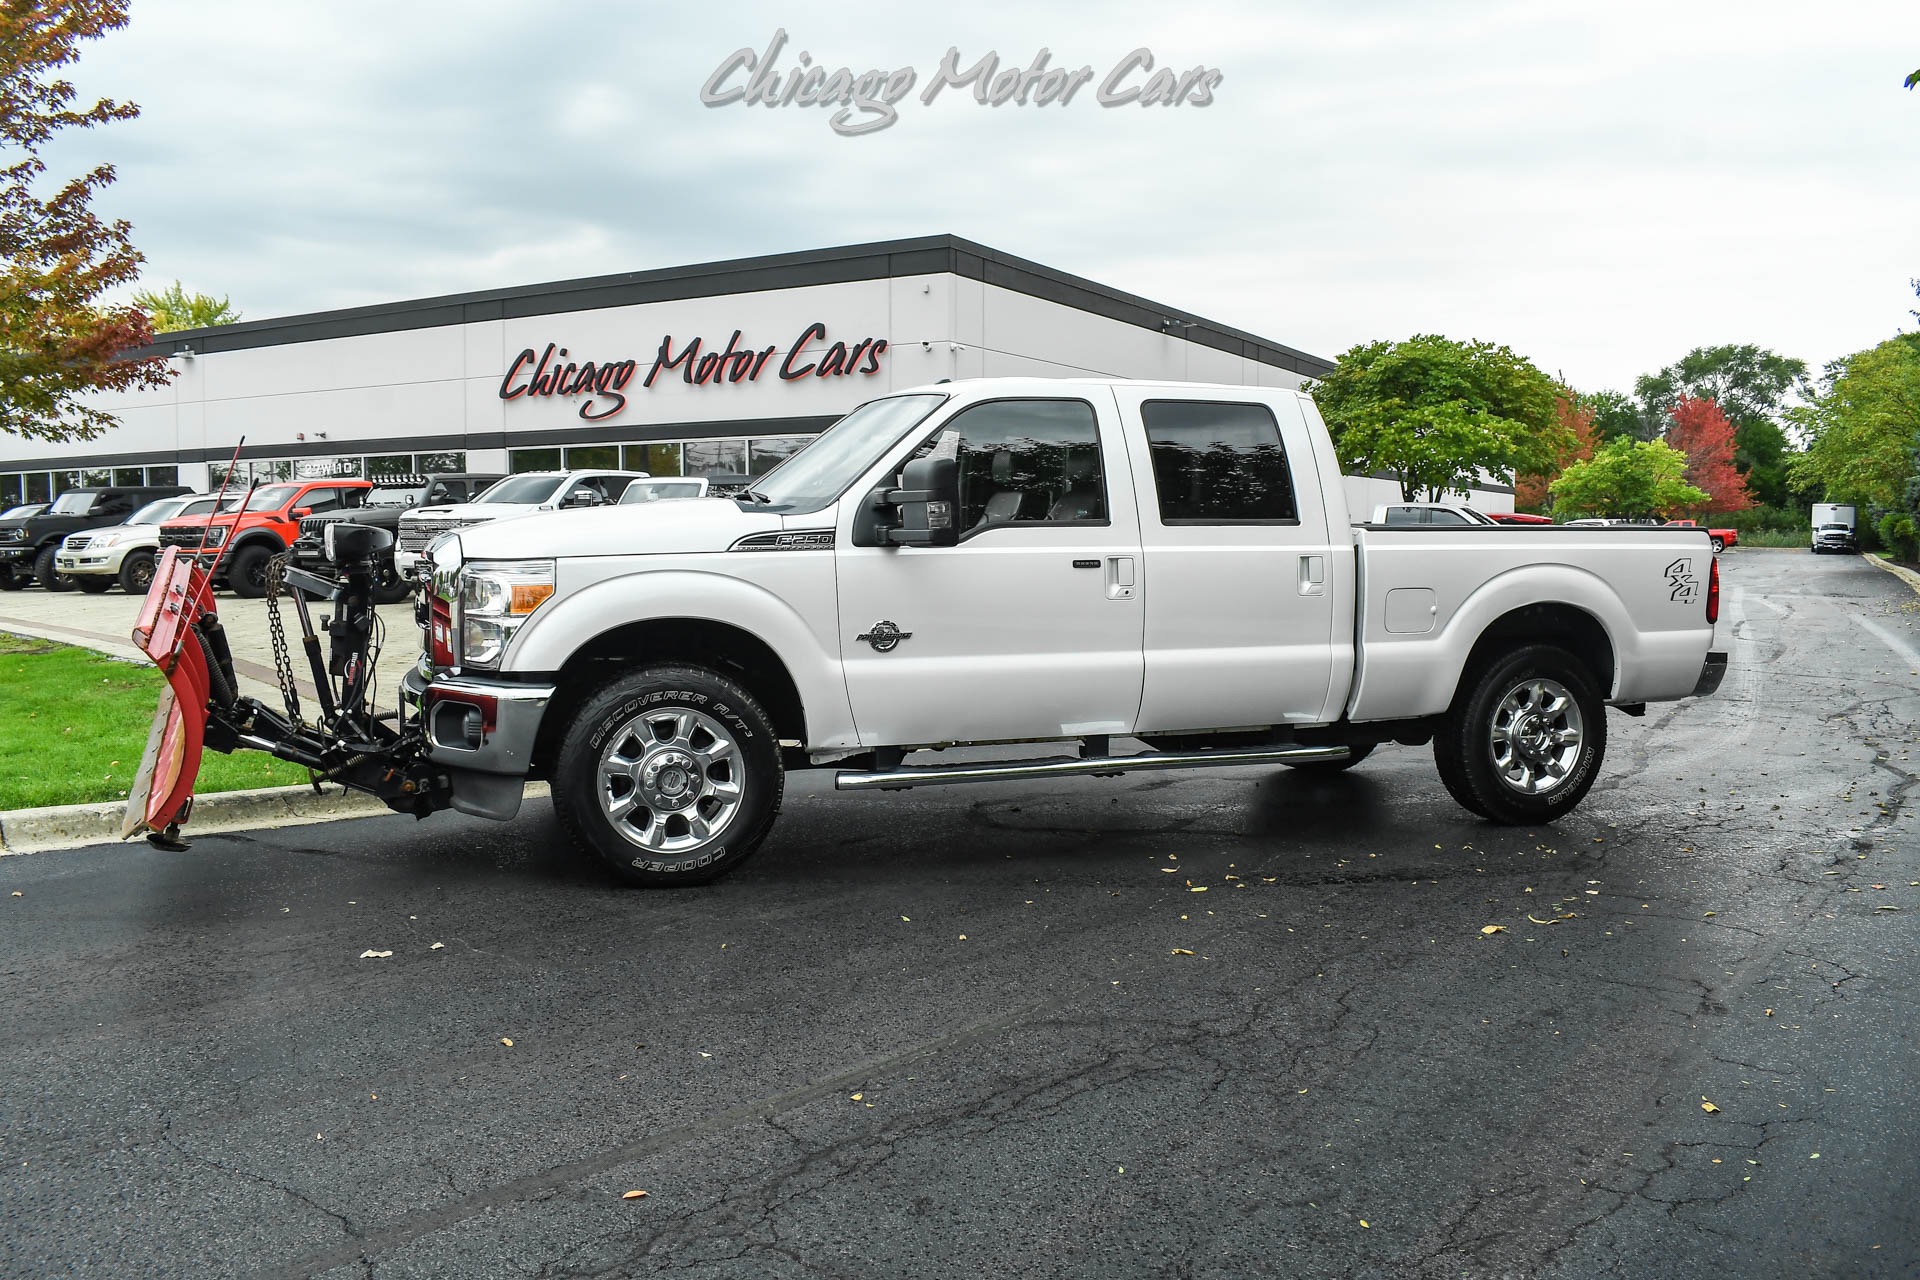 Used-2013-Ford-F-250-Super-Duty-WESTERN-PLOW-Package-Lariat-Crew-Cab-w-67L-Power-Stroke-V8-Great-Condit